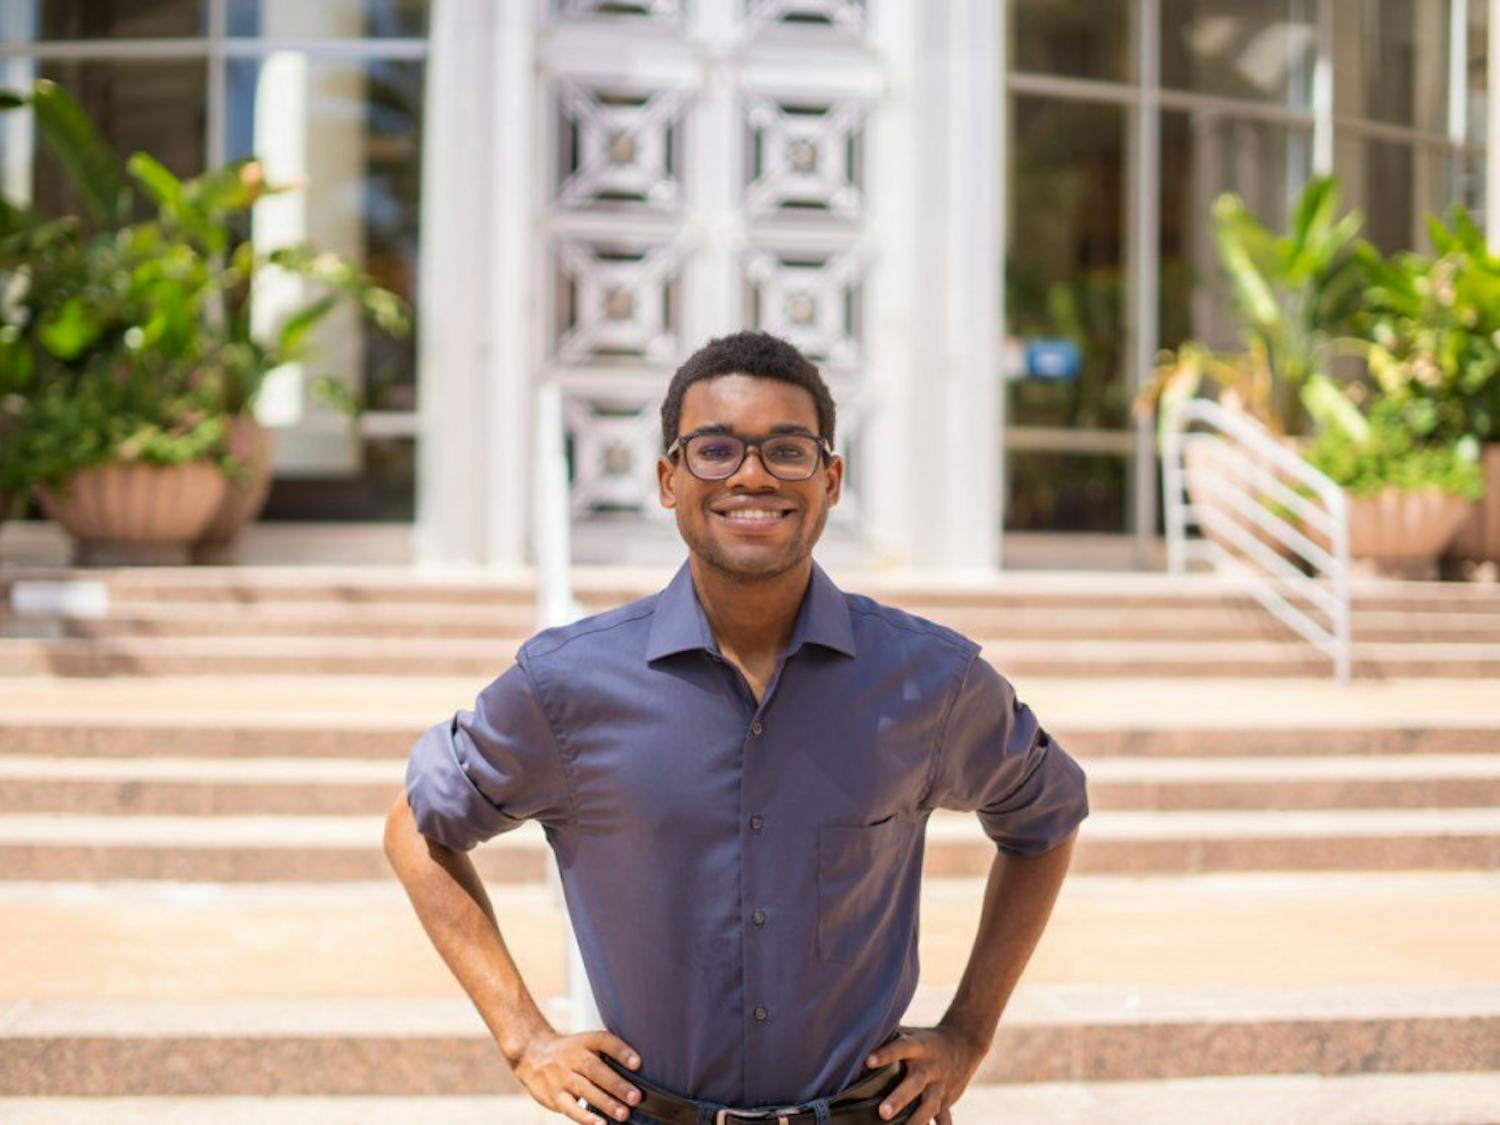 Nate Douglas, an Orlando native and UF economics junior, became&nbsp;Orange County’s Soil and Water Conservation District 1&nbsp;supervisor-elect on Nov. 3.